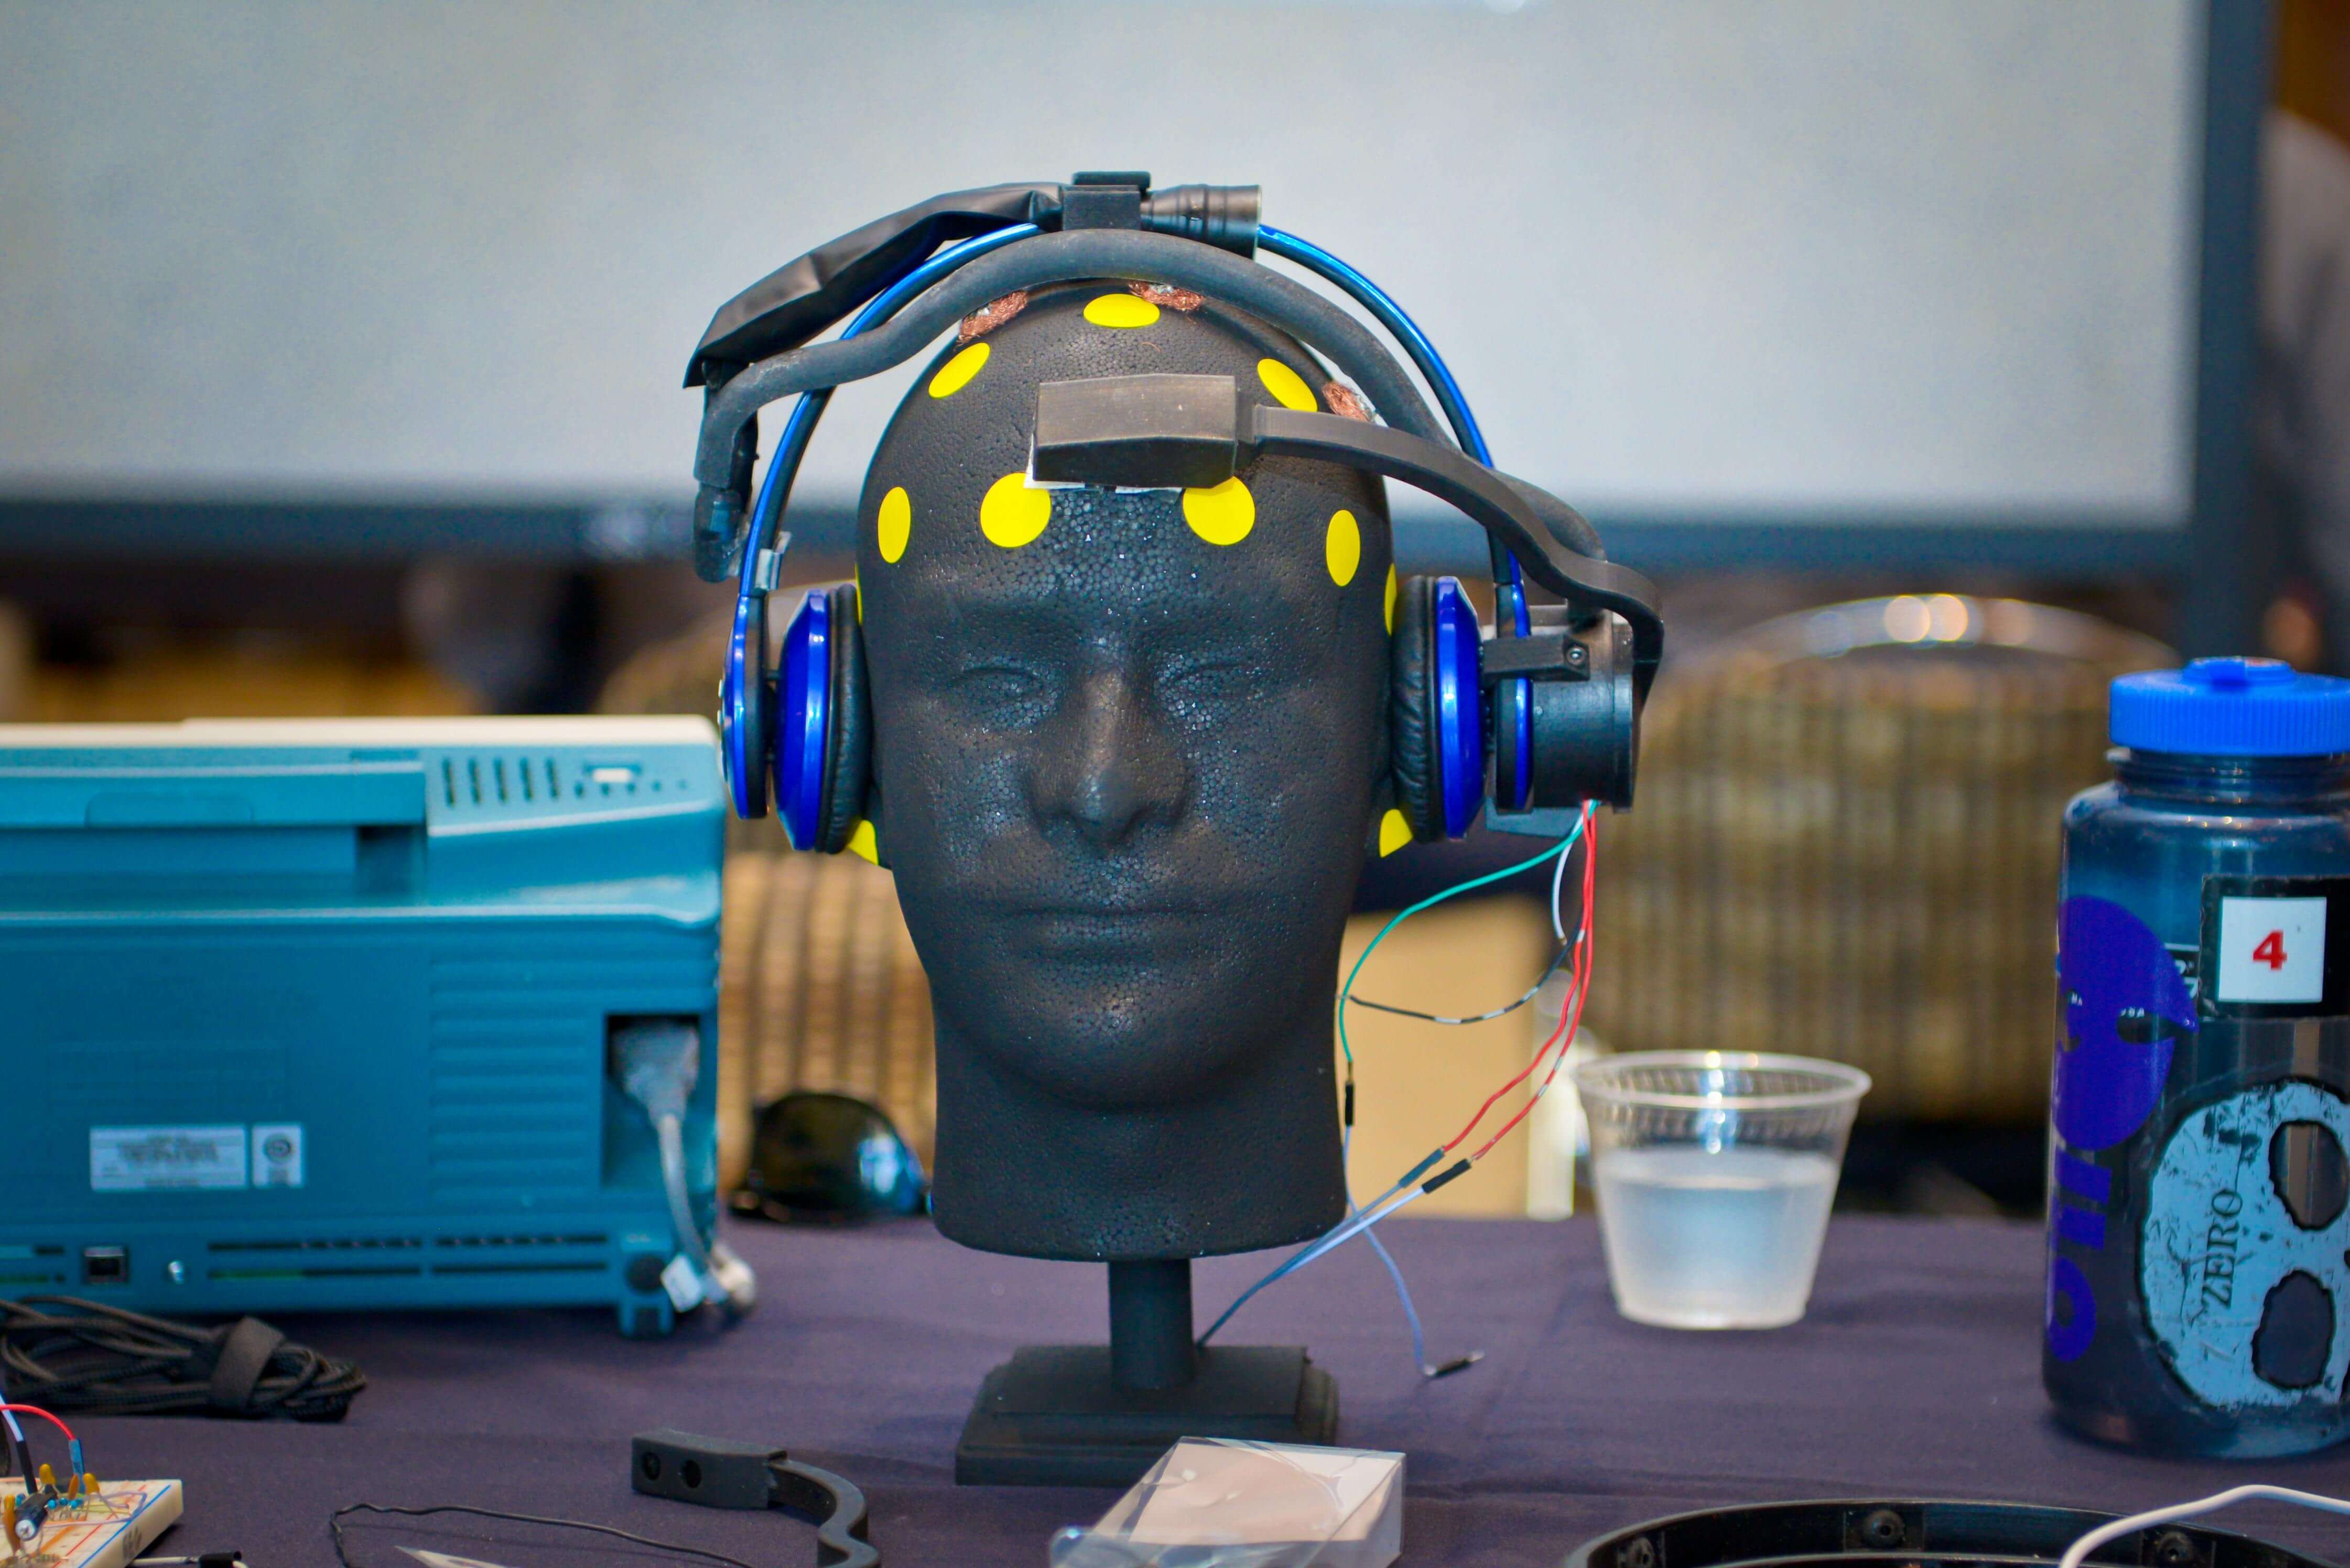 Mannequin head with sensors.